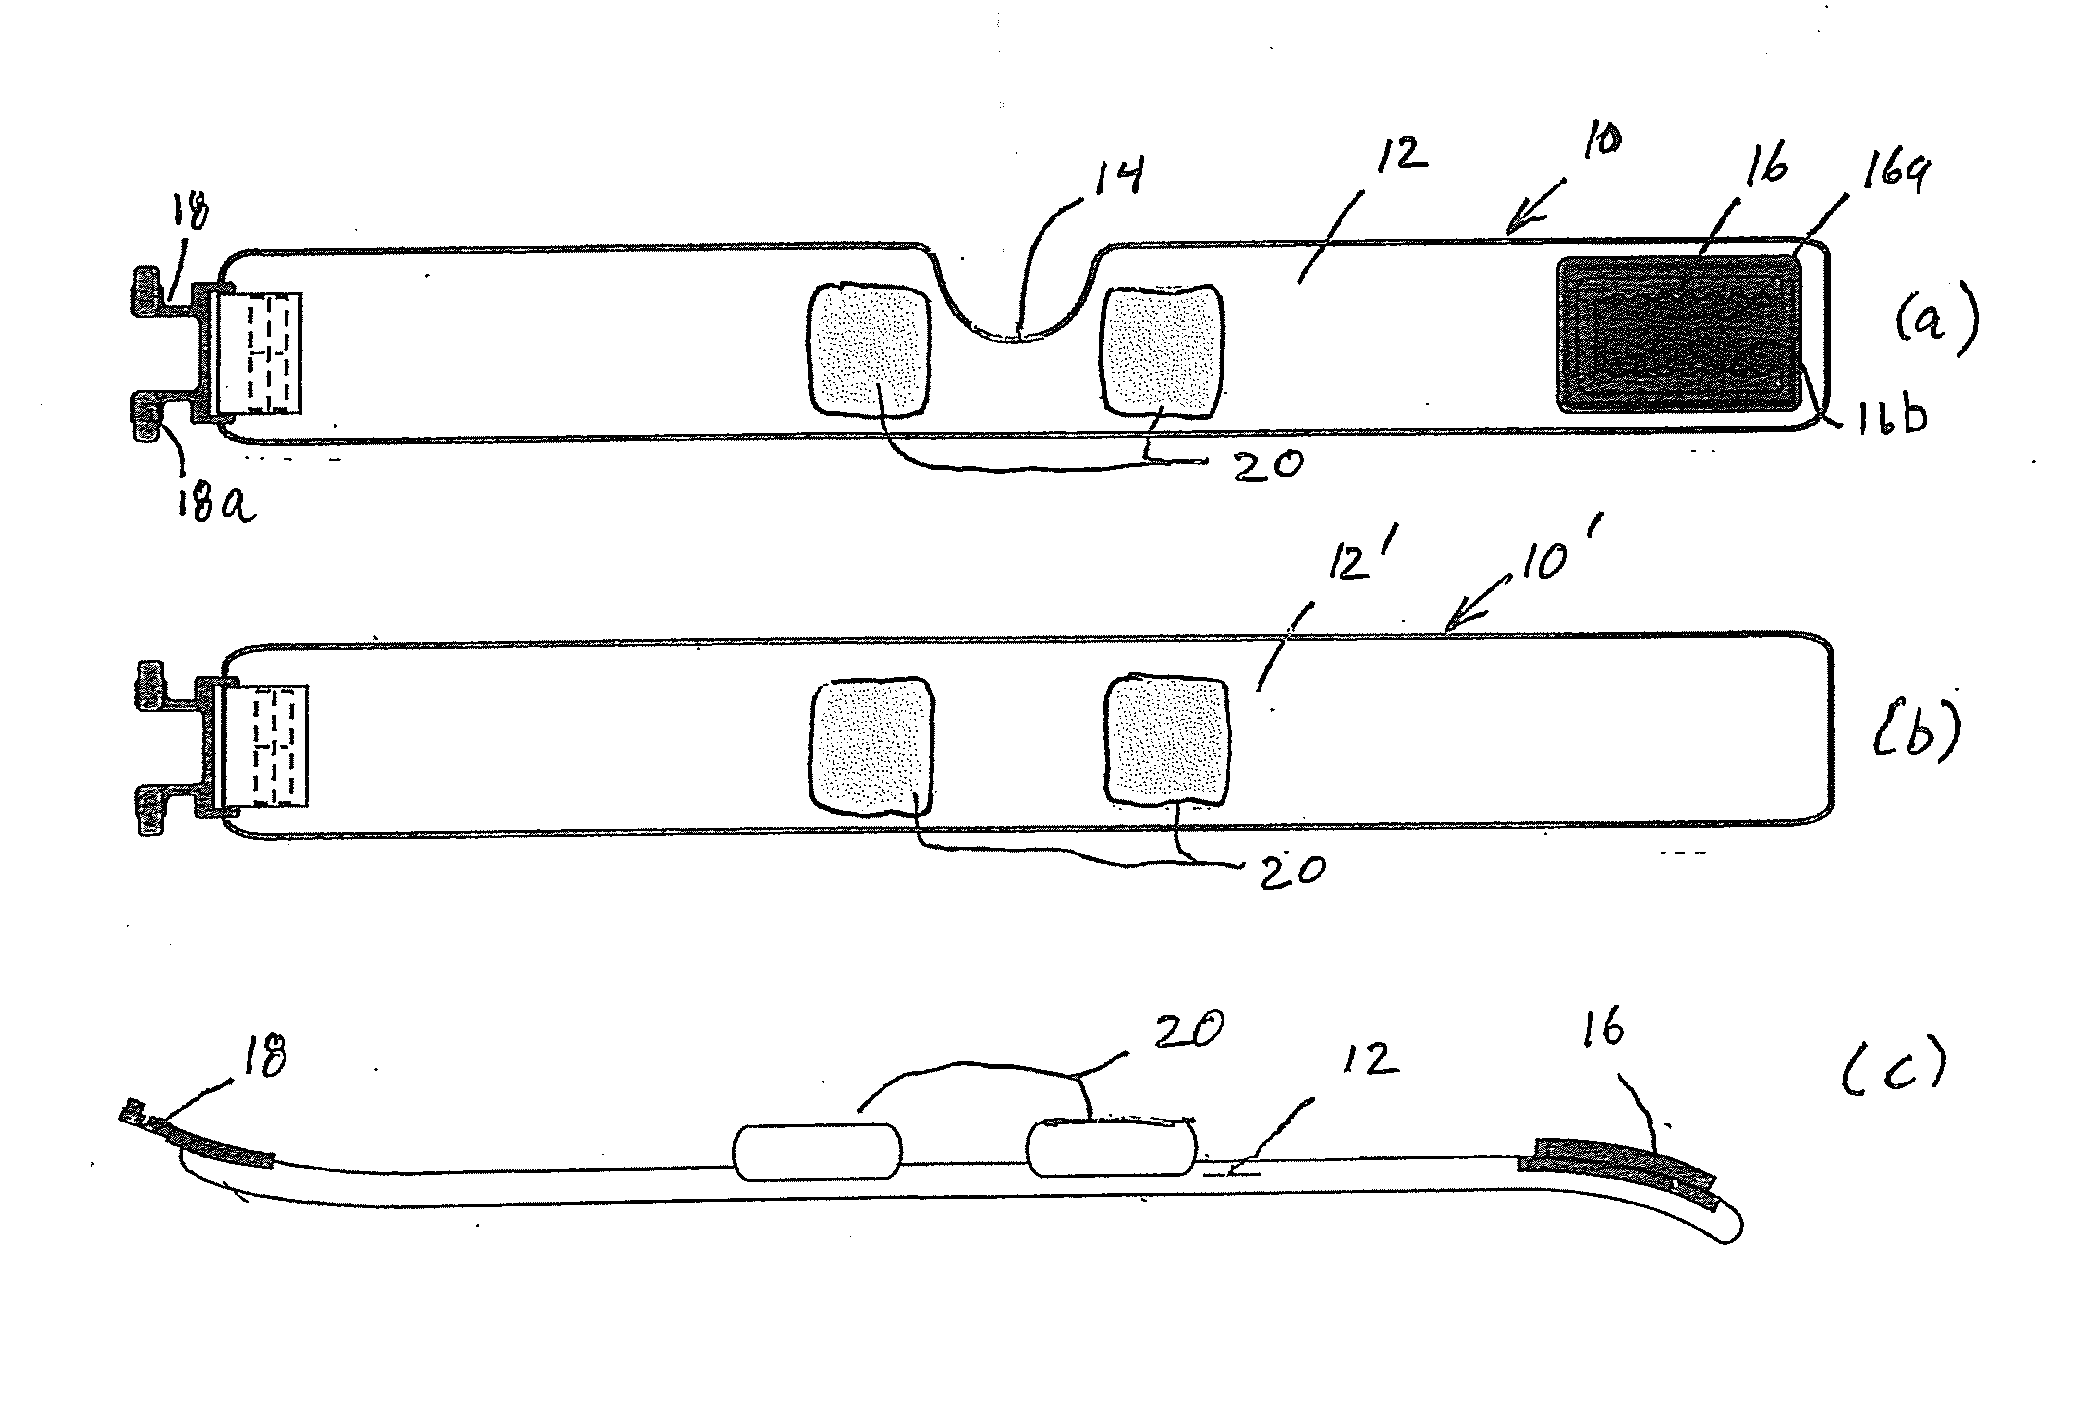 Methods and devices to reduce the likelihood of injury from concussive or blast forces